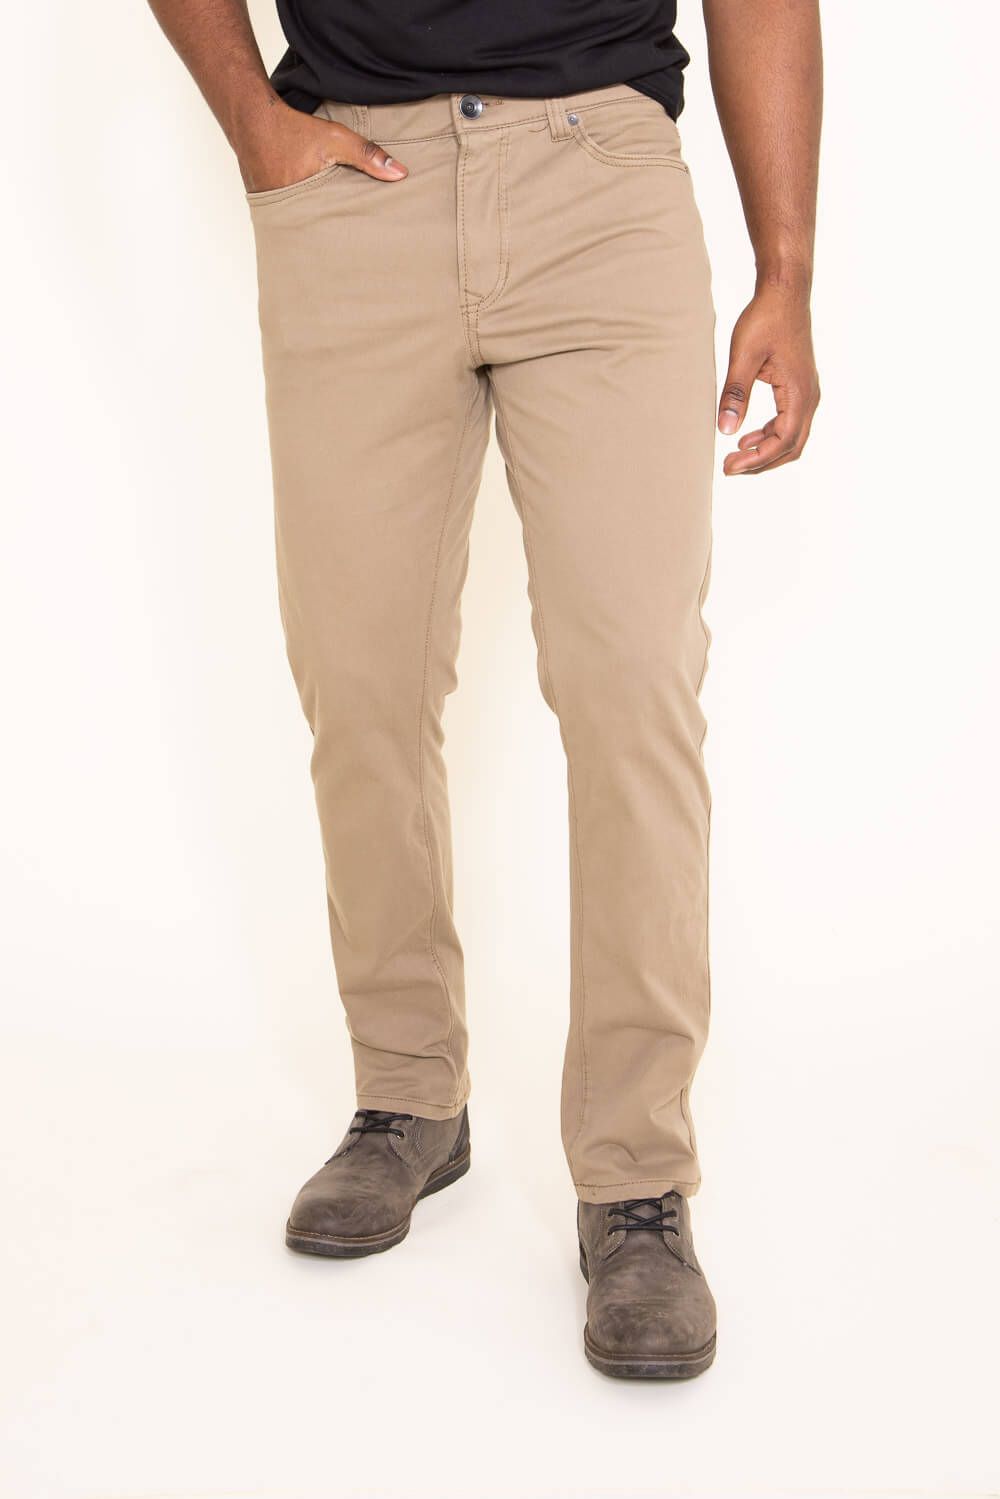 Union Five-Pocket Comfort Twill Pants for Men in Brown | H3538WT 